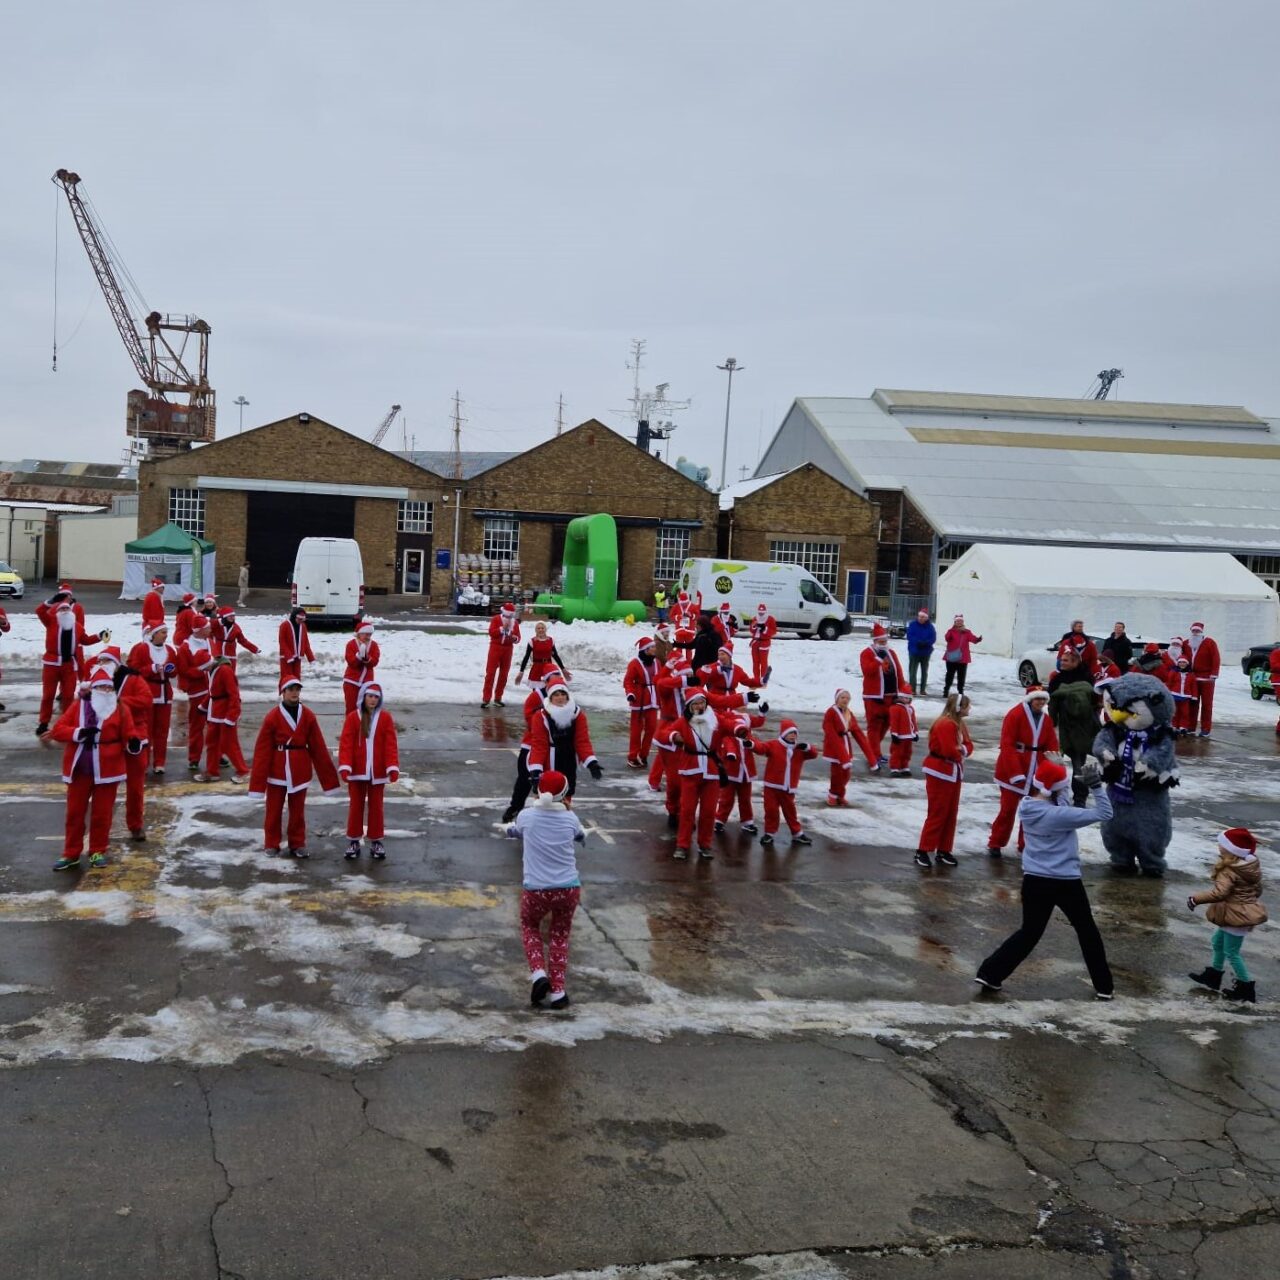 https://www.therightstepdc.co.uk/wp-content/uploads/2022/12/SQ-Santa-Fun-Run-Warm-Up-2022-Dance-Medway-1280x1280.jpg